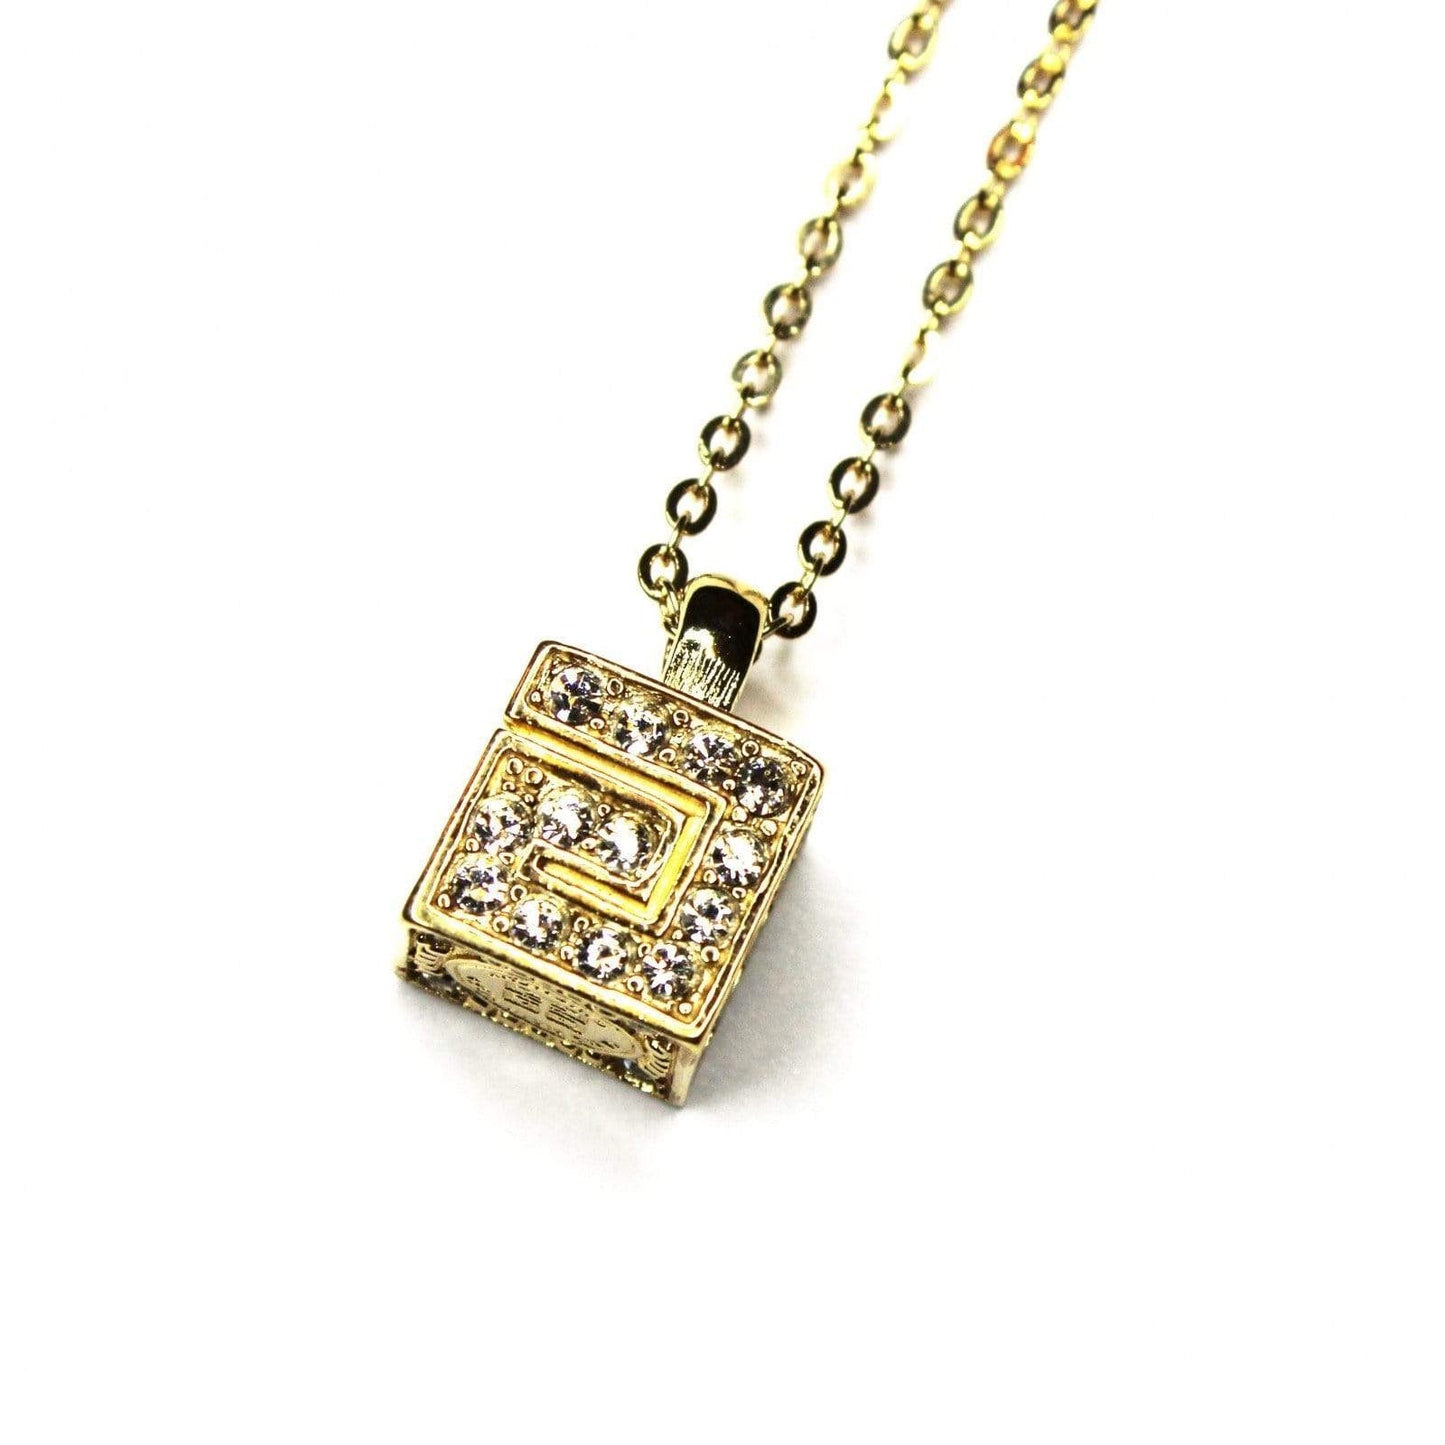 Gold Givenchy G Cube Normal Link Necklace with Crystal Accents RSTKD Vintage